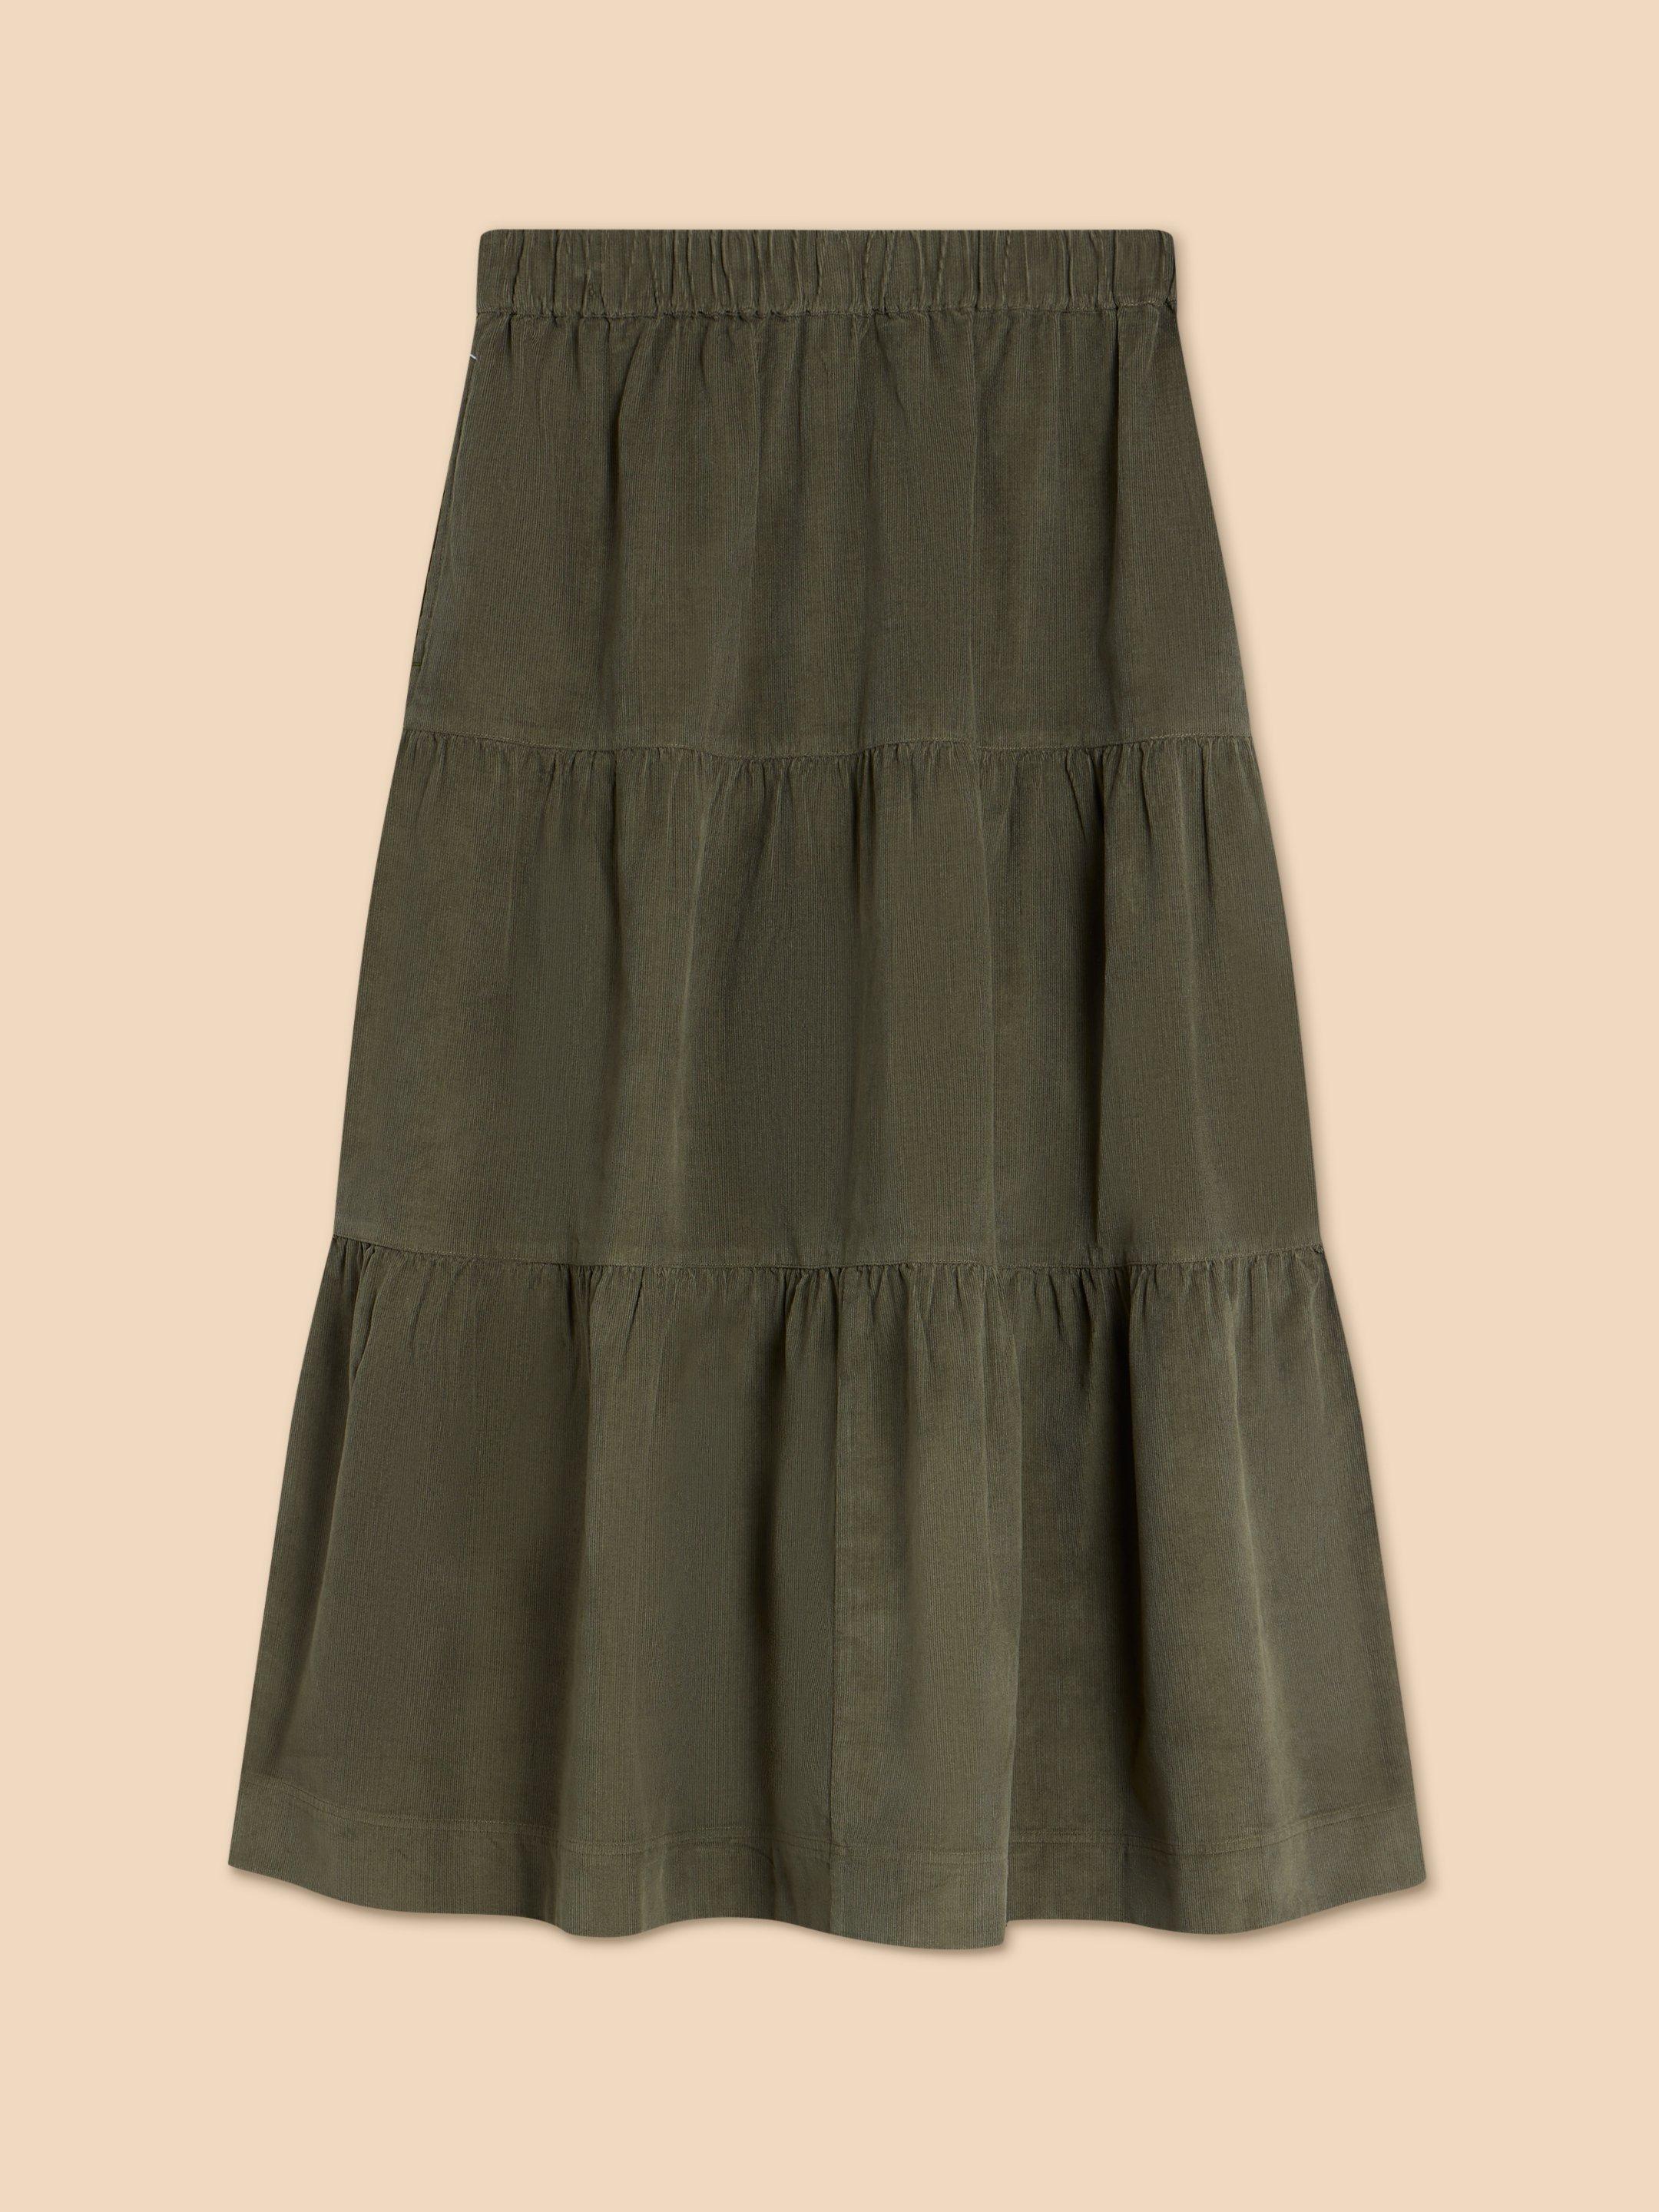 Jade Tiered Cord Skirt in KHAKI GRN - FLAT FRONT